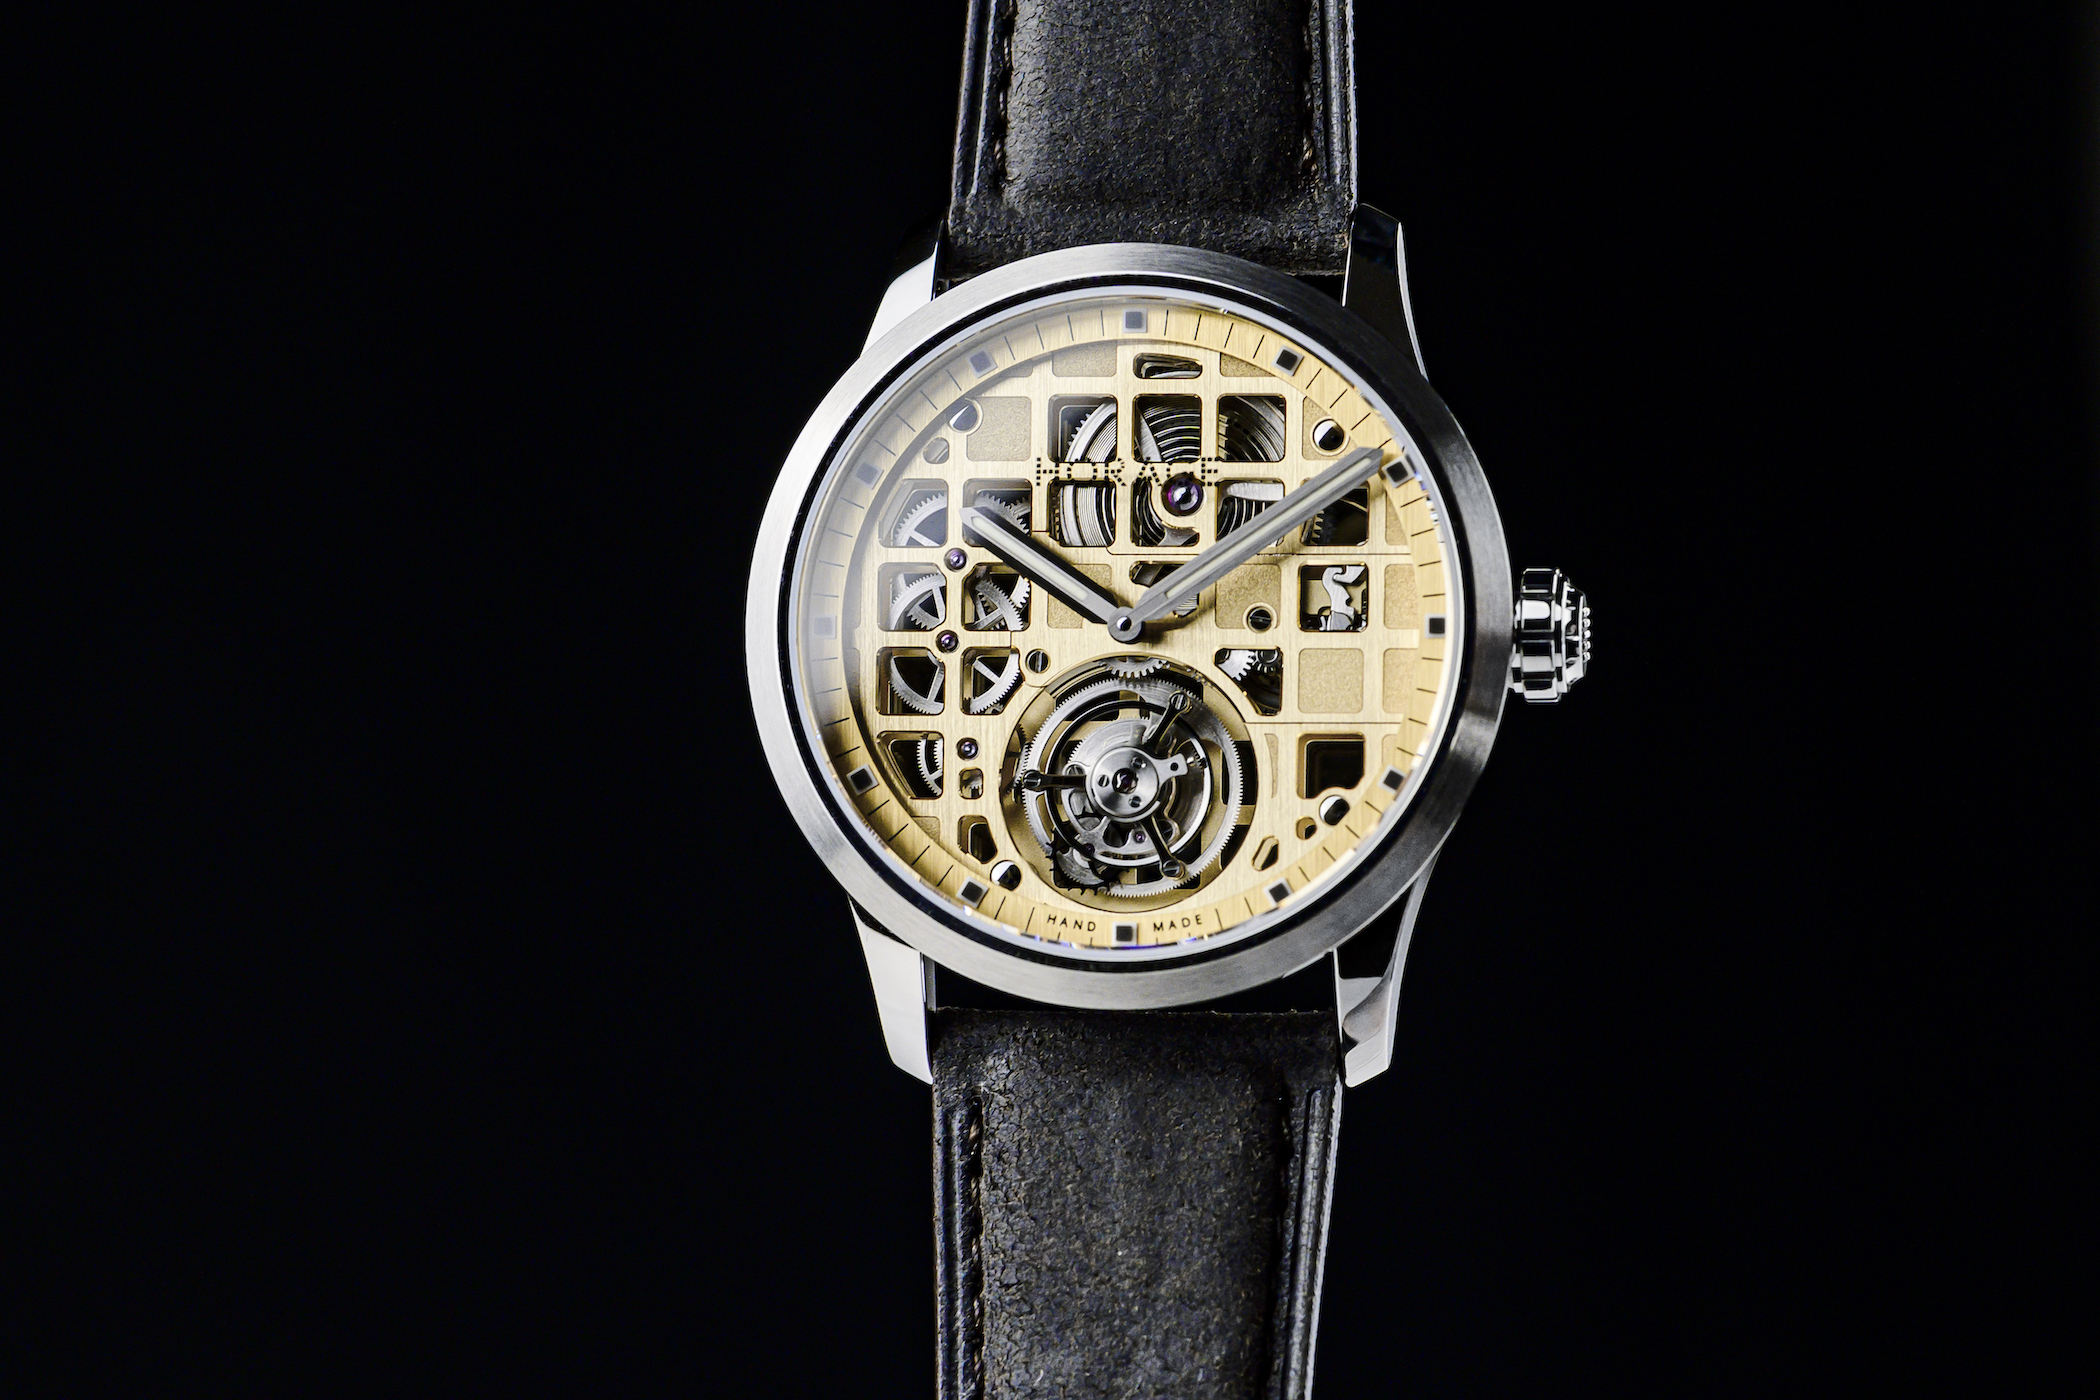 HORAGE Tourbillon one dollar contest giveaway